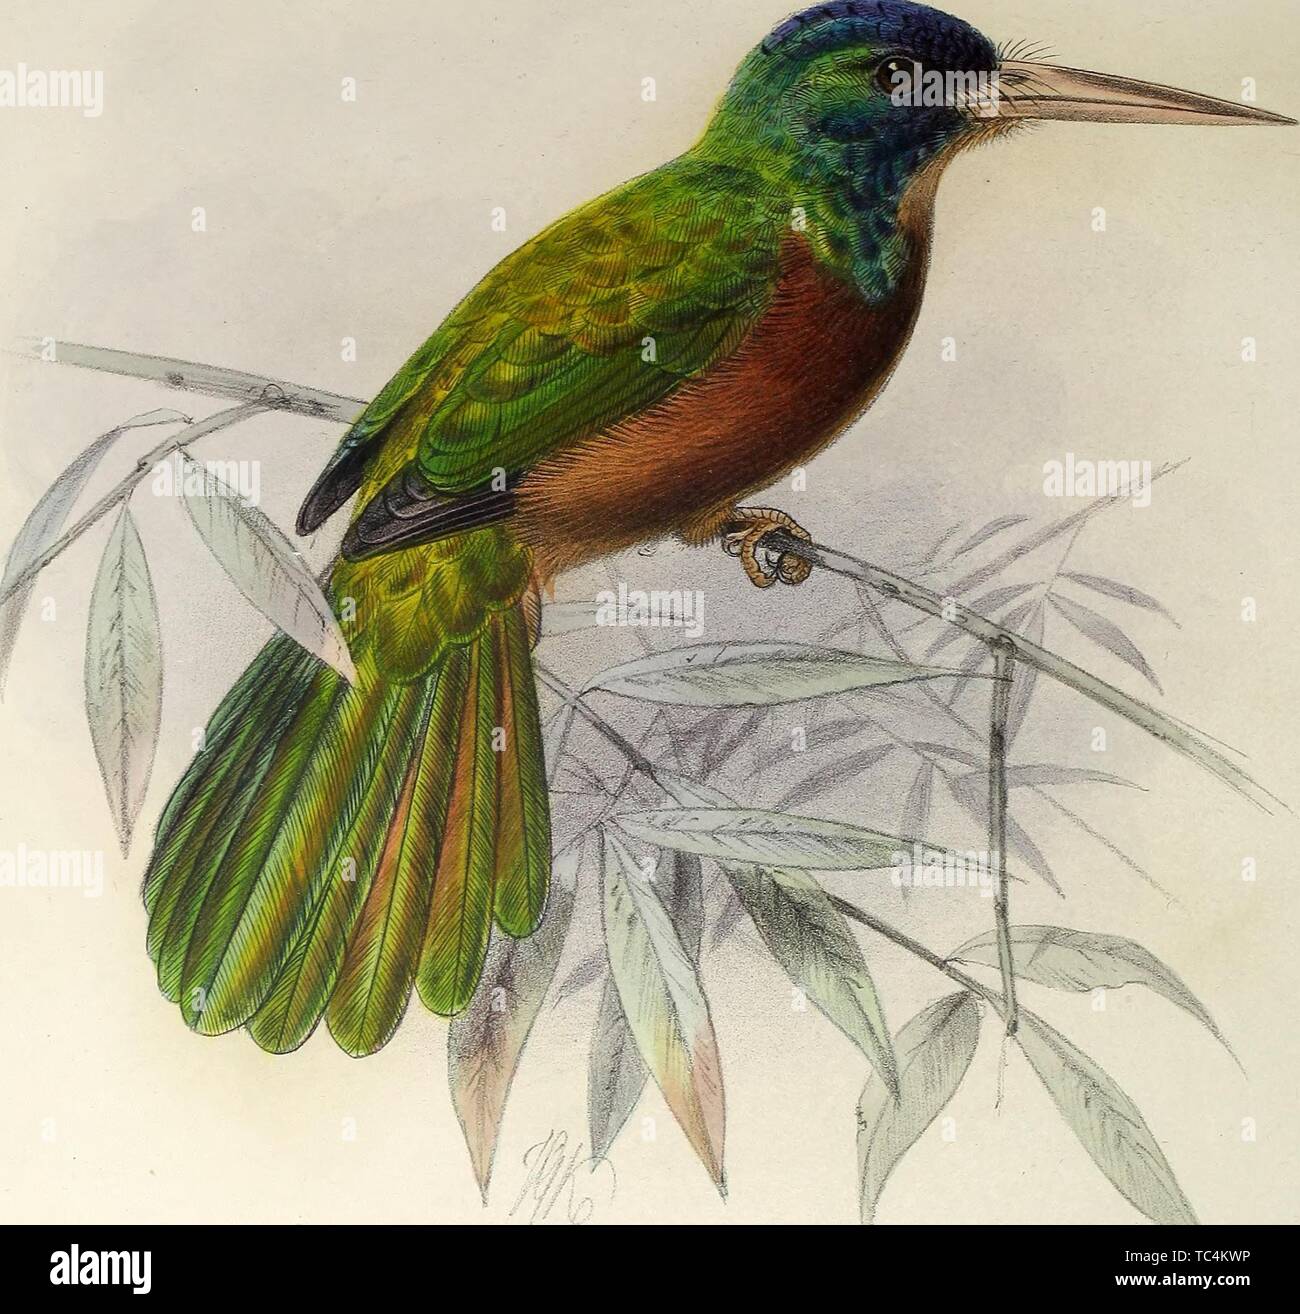 Engraving of the Blue-Necked Jacamar (Galbula Cyaneicollis), from the book 'A monograph of the jacamars and puff-birds' by Philip Lutley Sclater, 1882. Courtesy Internet Archive. () Stock Photo